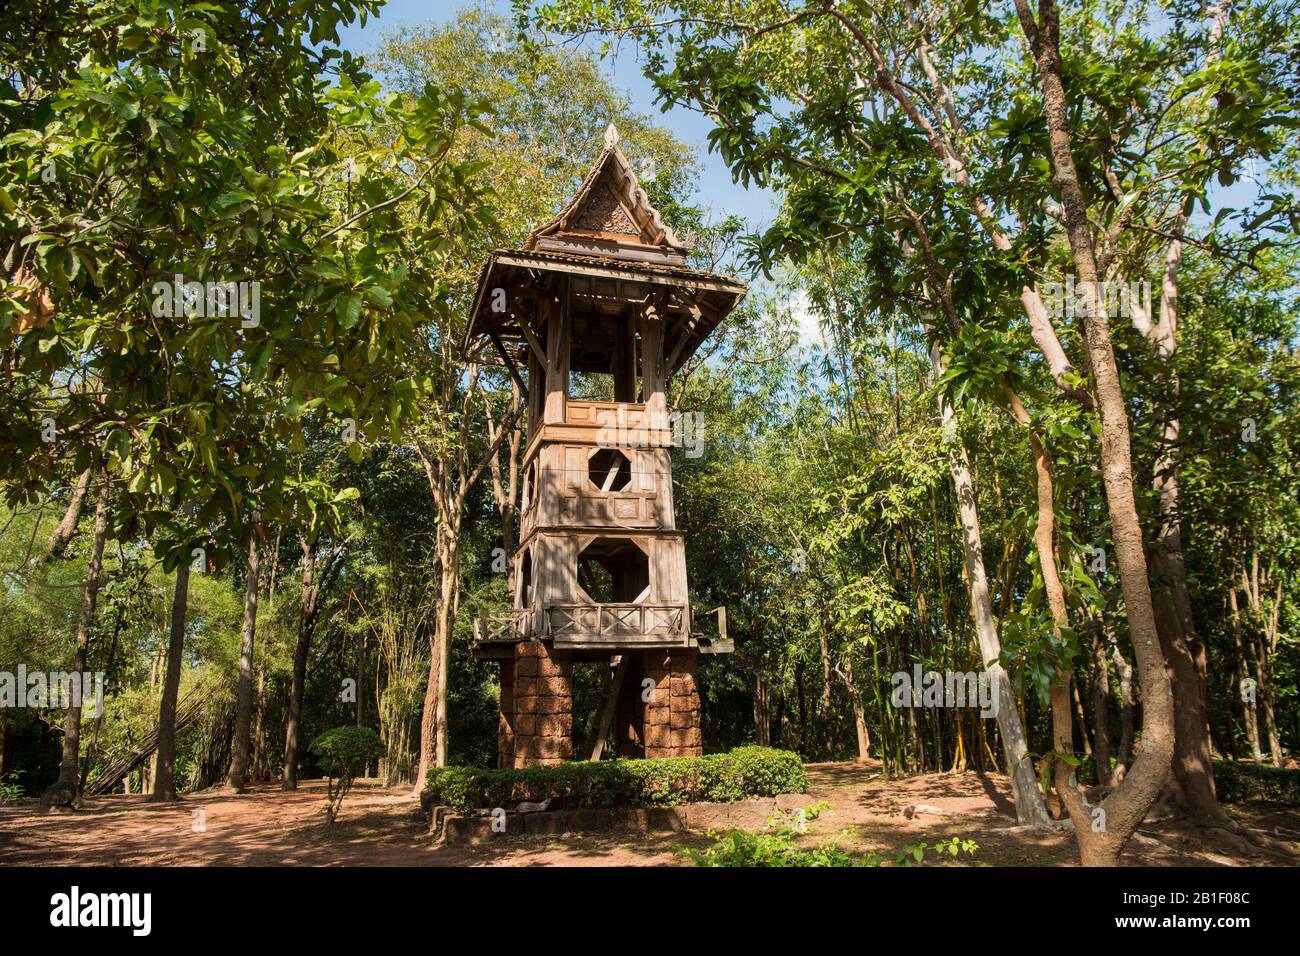 a traditional wood Toer at the Wat Chang Rob Temple in the town of Kamphaeng Phet in the Kamphaeng Phet Province in North Thailand.   Thailand, Kampha Stock Photo